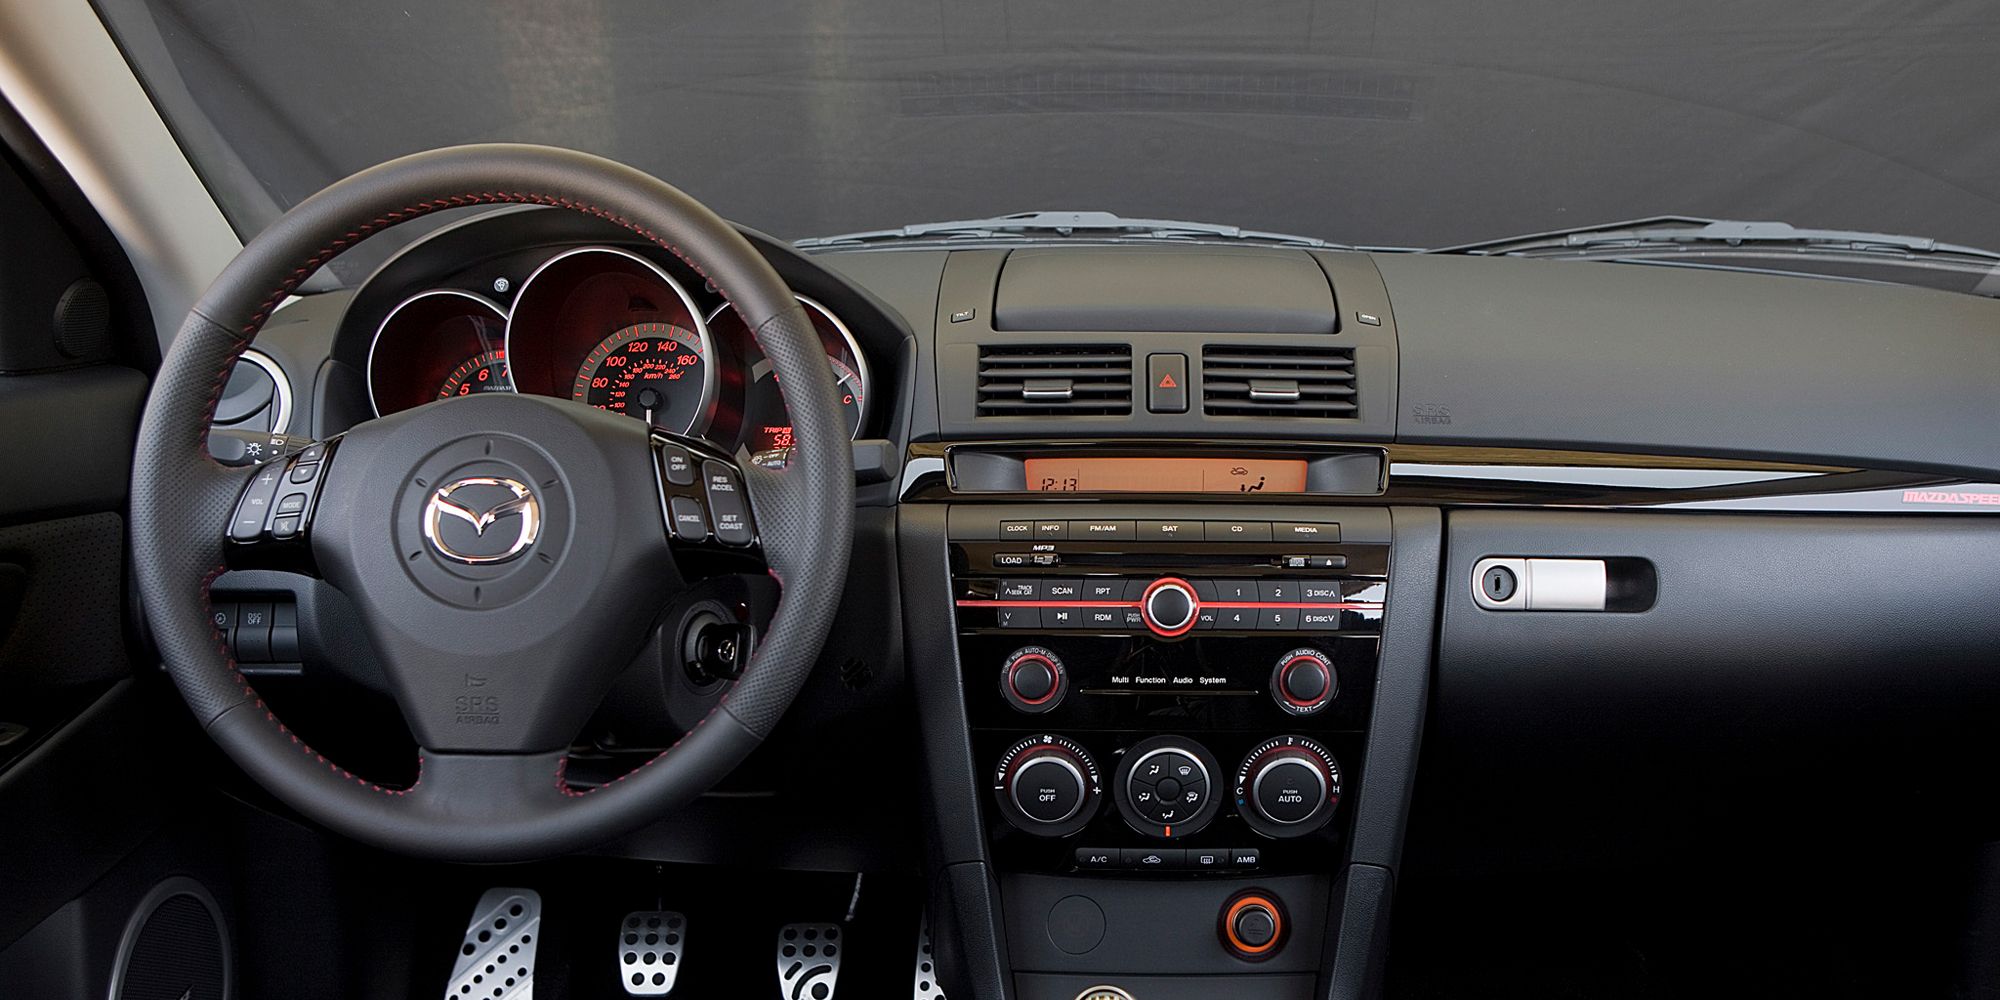 The interior of the first generation Mazdaspeed 3